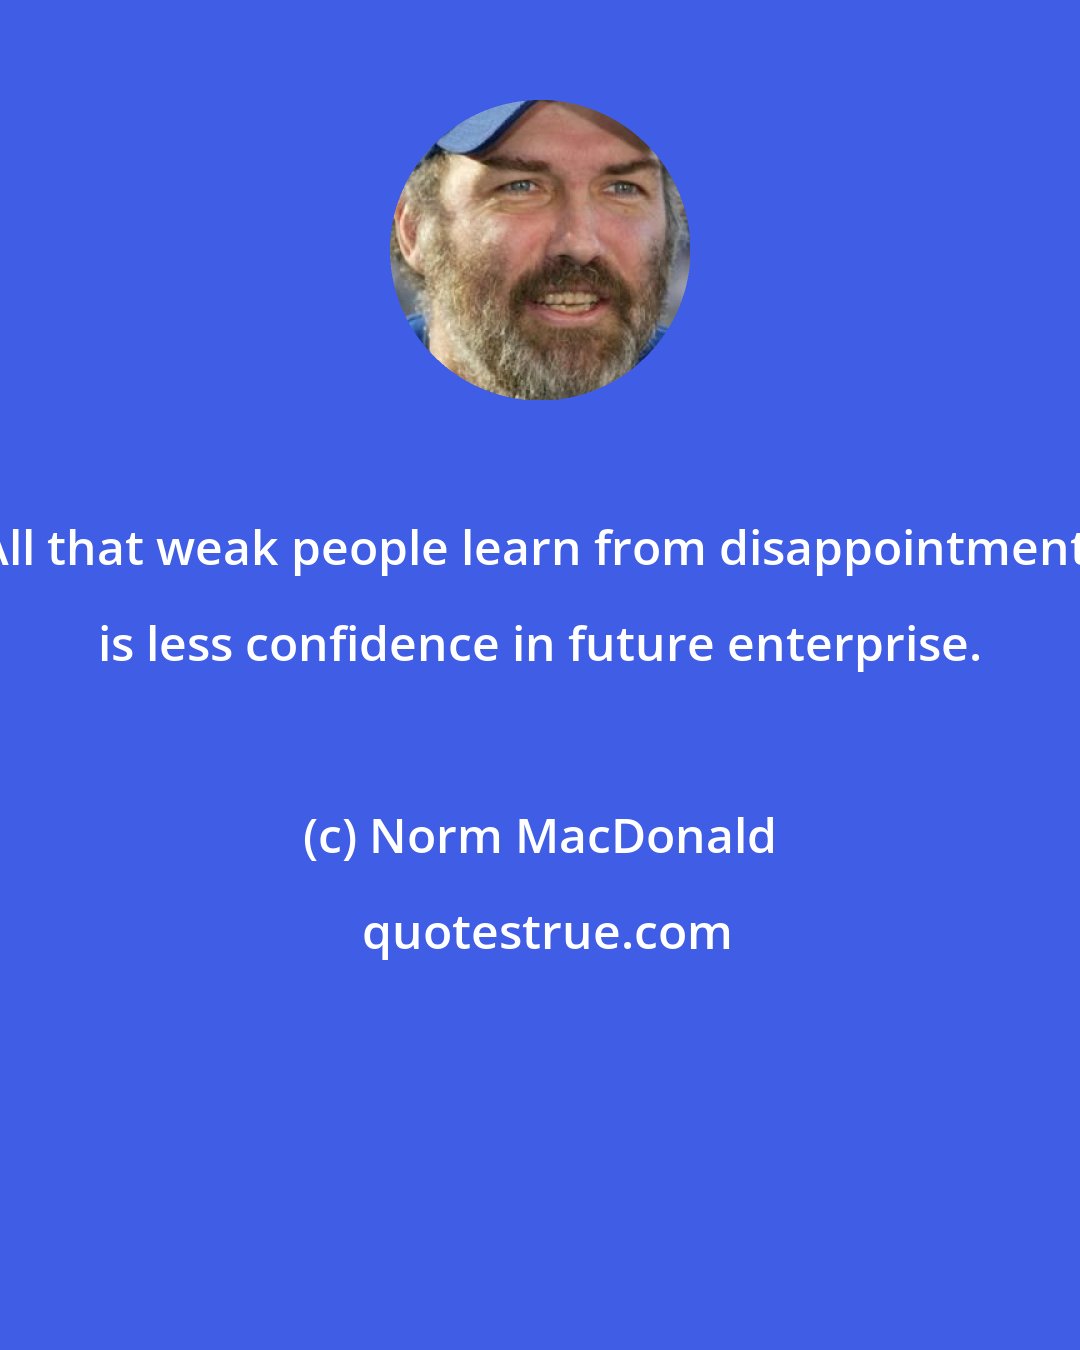 Norm MacDonald: All that weak people learn from disappointment, is less confidence in future enterprise.